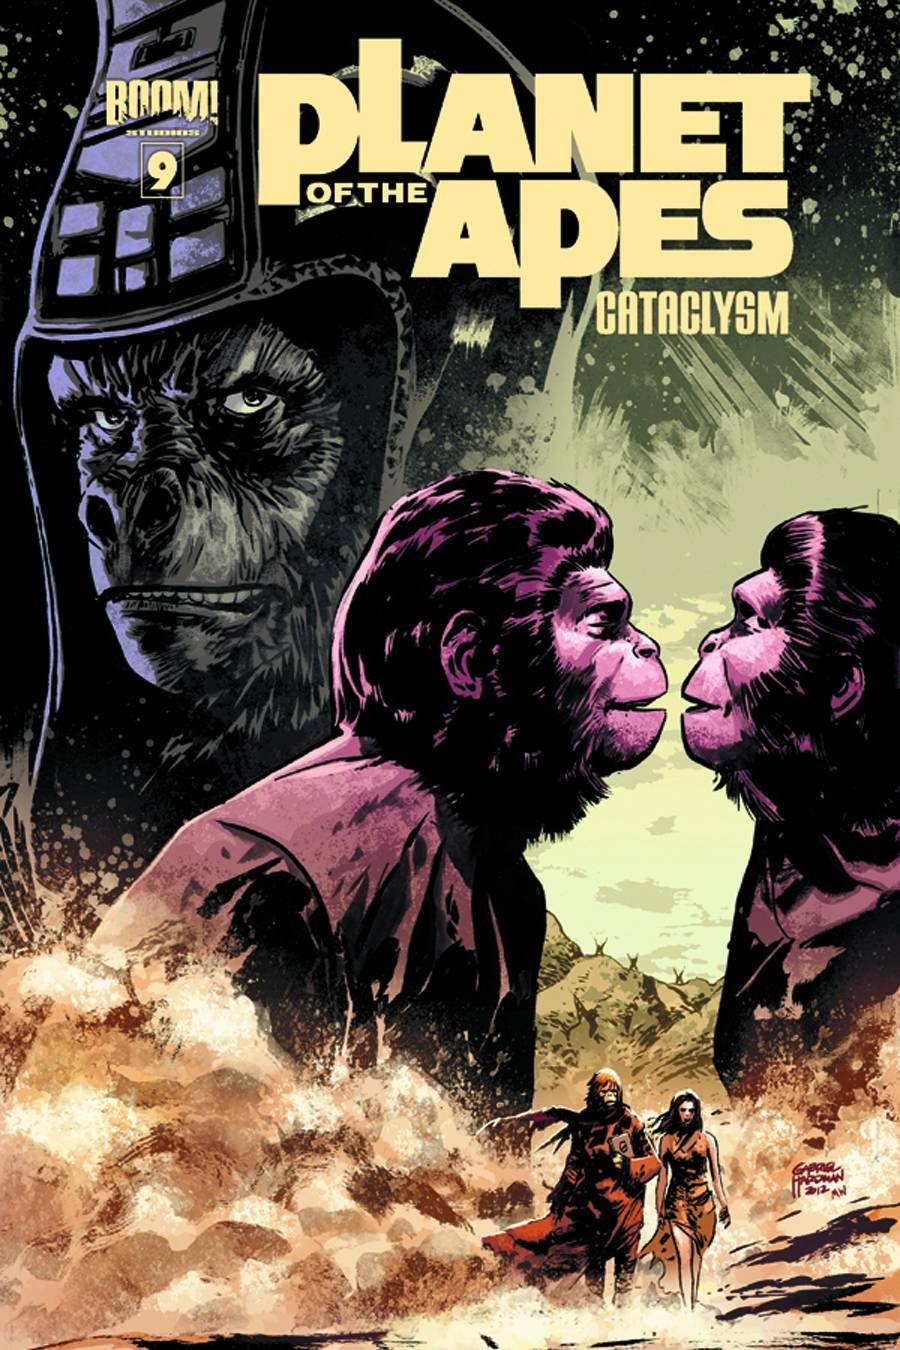 Planet of the Apes: Cataclysm #9 Comic